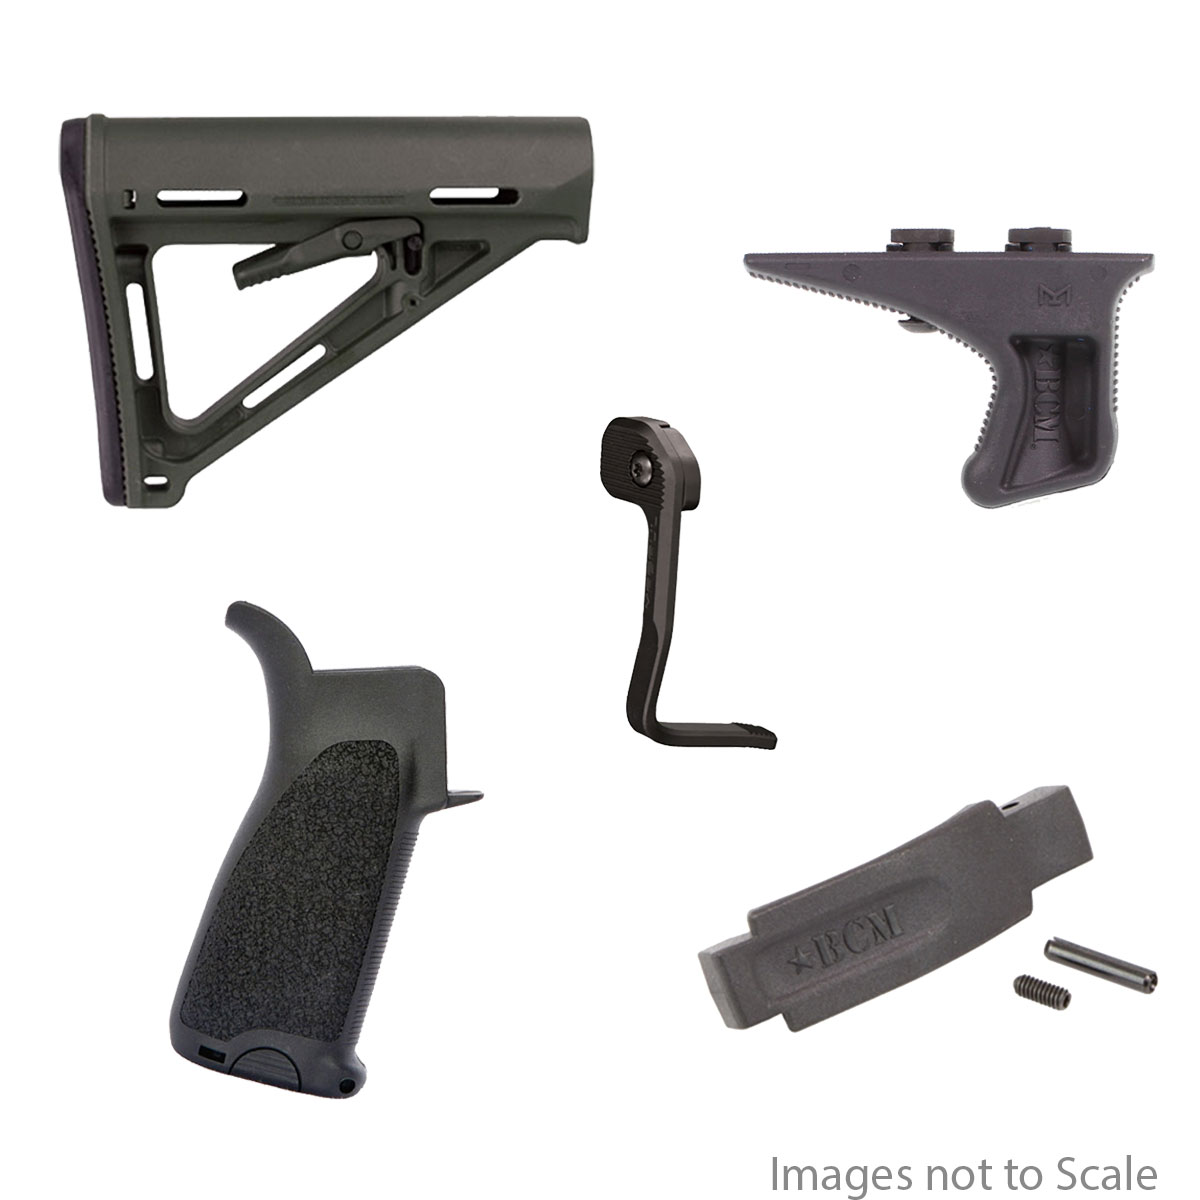 Furniture Kit: Magpul MOE Mil-Spec Collapsible AR-15 Carbine Synthetic Buttstock + BCM Gunfighter Black Mod 3 Grip + Magpul BAD Lever Extended Bolt Catch + BCM Kinesthetic Angled Grip + BCM Gunfighter AR-15 Trigger Guard - Black